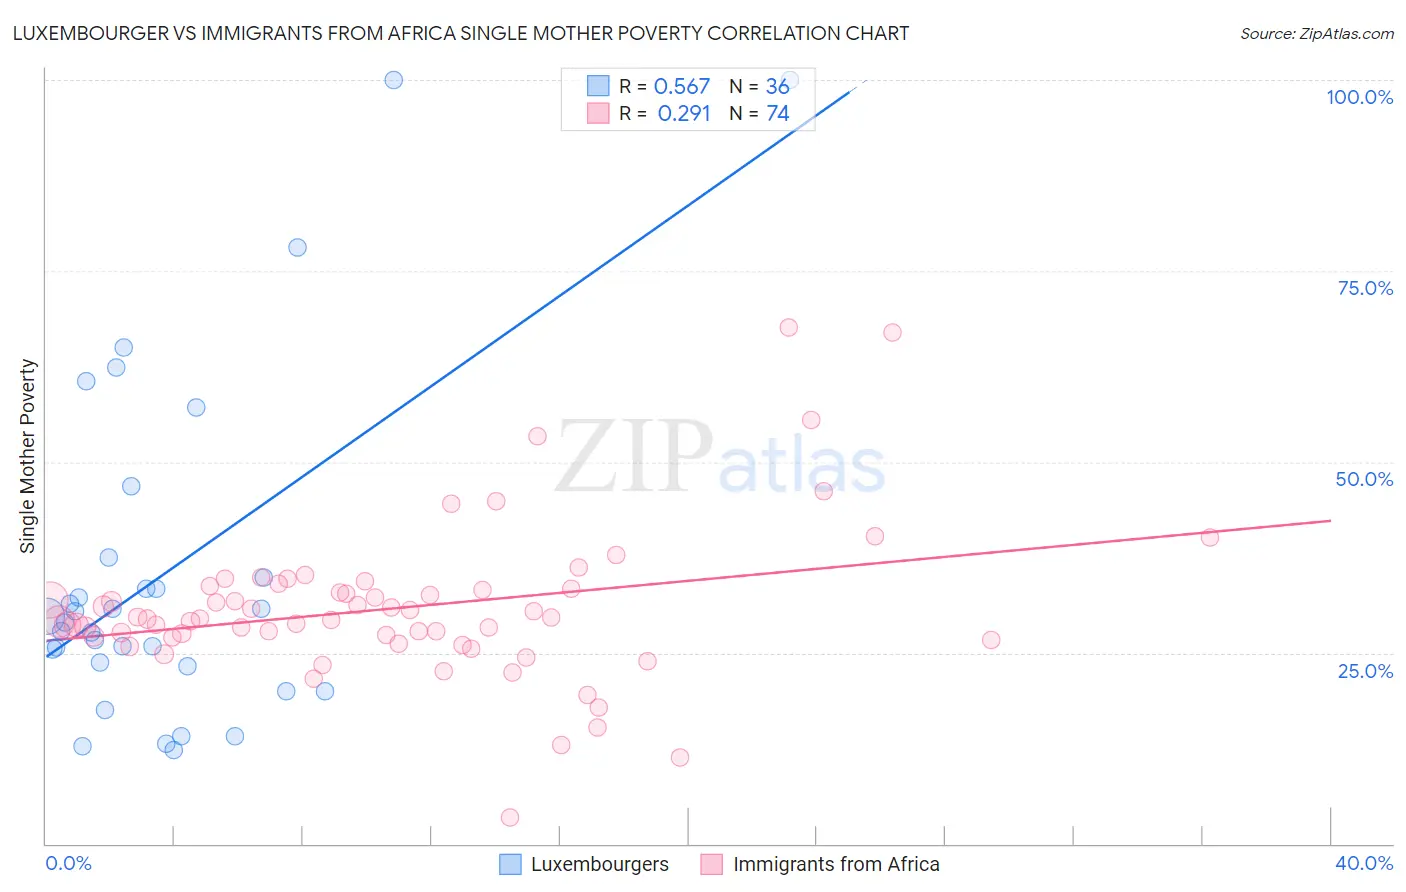 Luxembourger vs Immigrants from Africa Single Mother Poverty